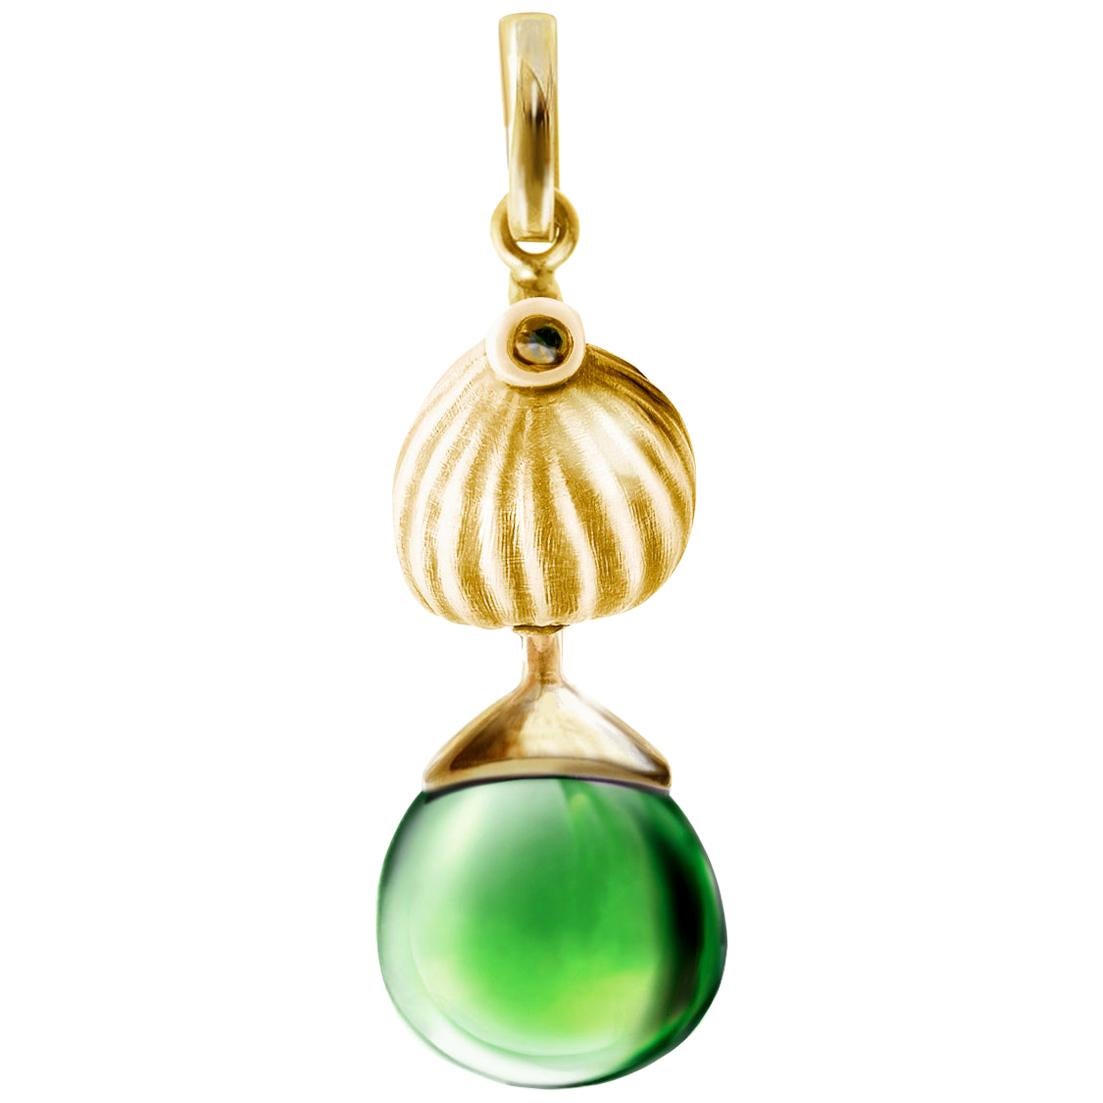 Yellow Gold Drop Pendant Necklace with Green Quartz by the Artist For Sale